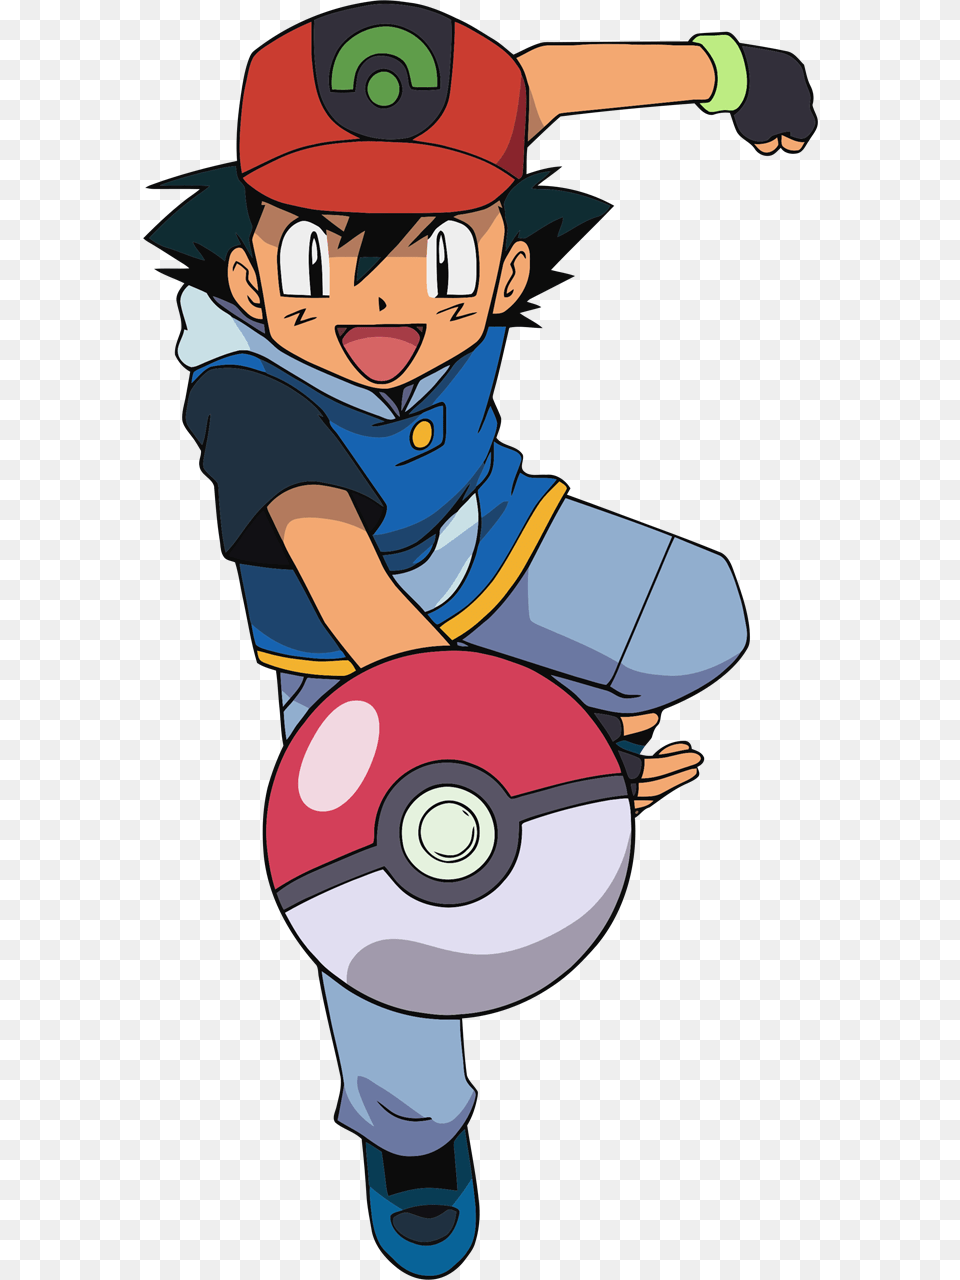 This Is Ash Ketchum The Main Trainer In The Original Ash Pokemon, Book, Comics, Publication, Baby Png